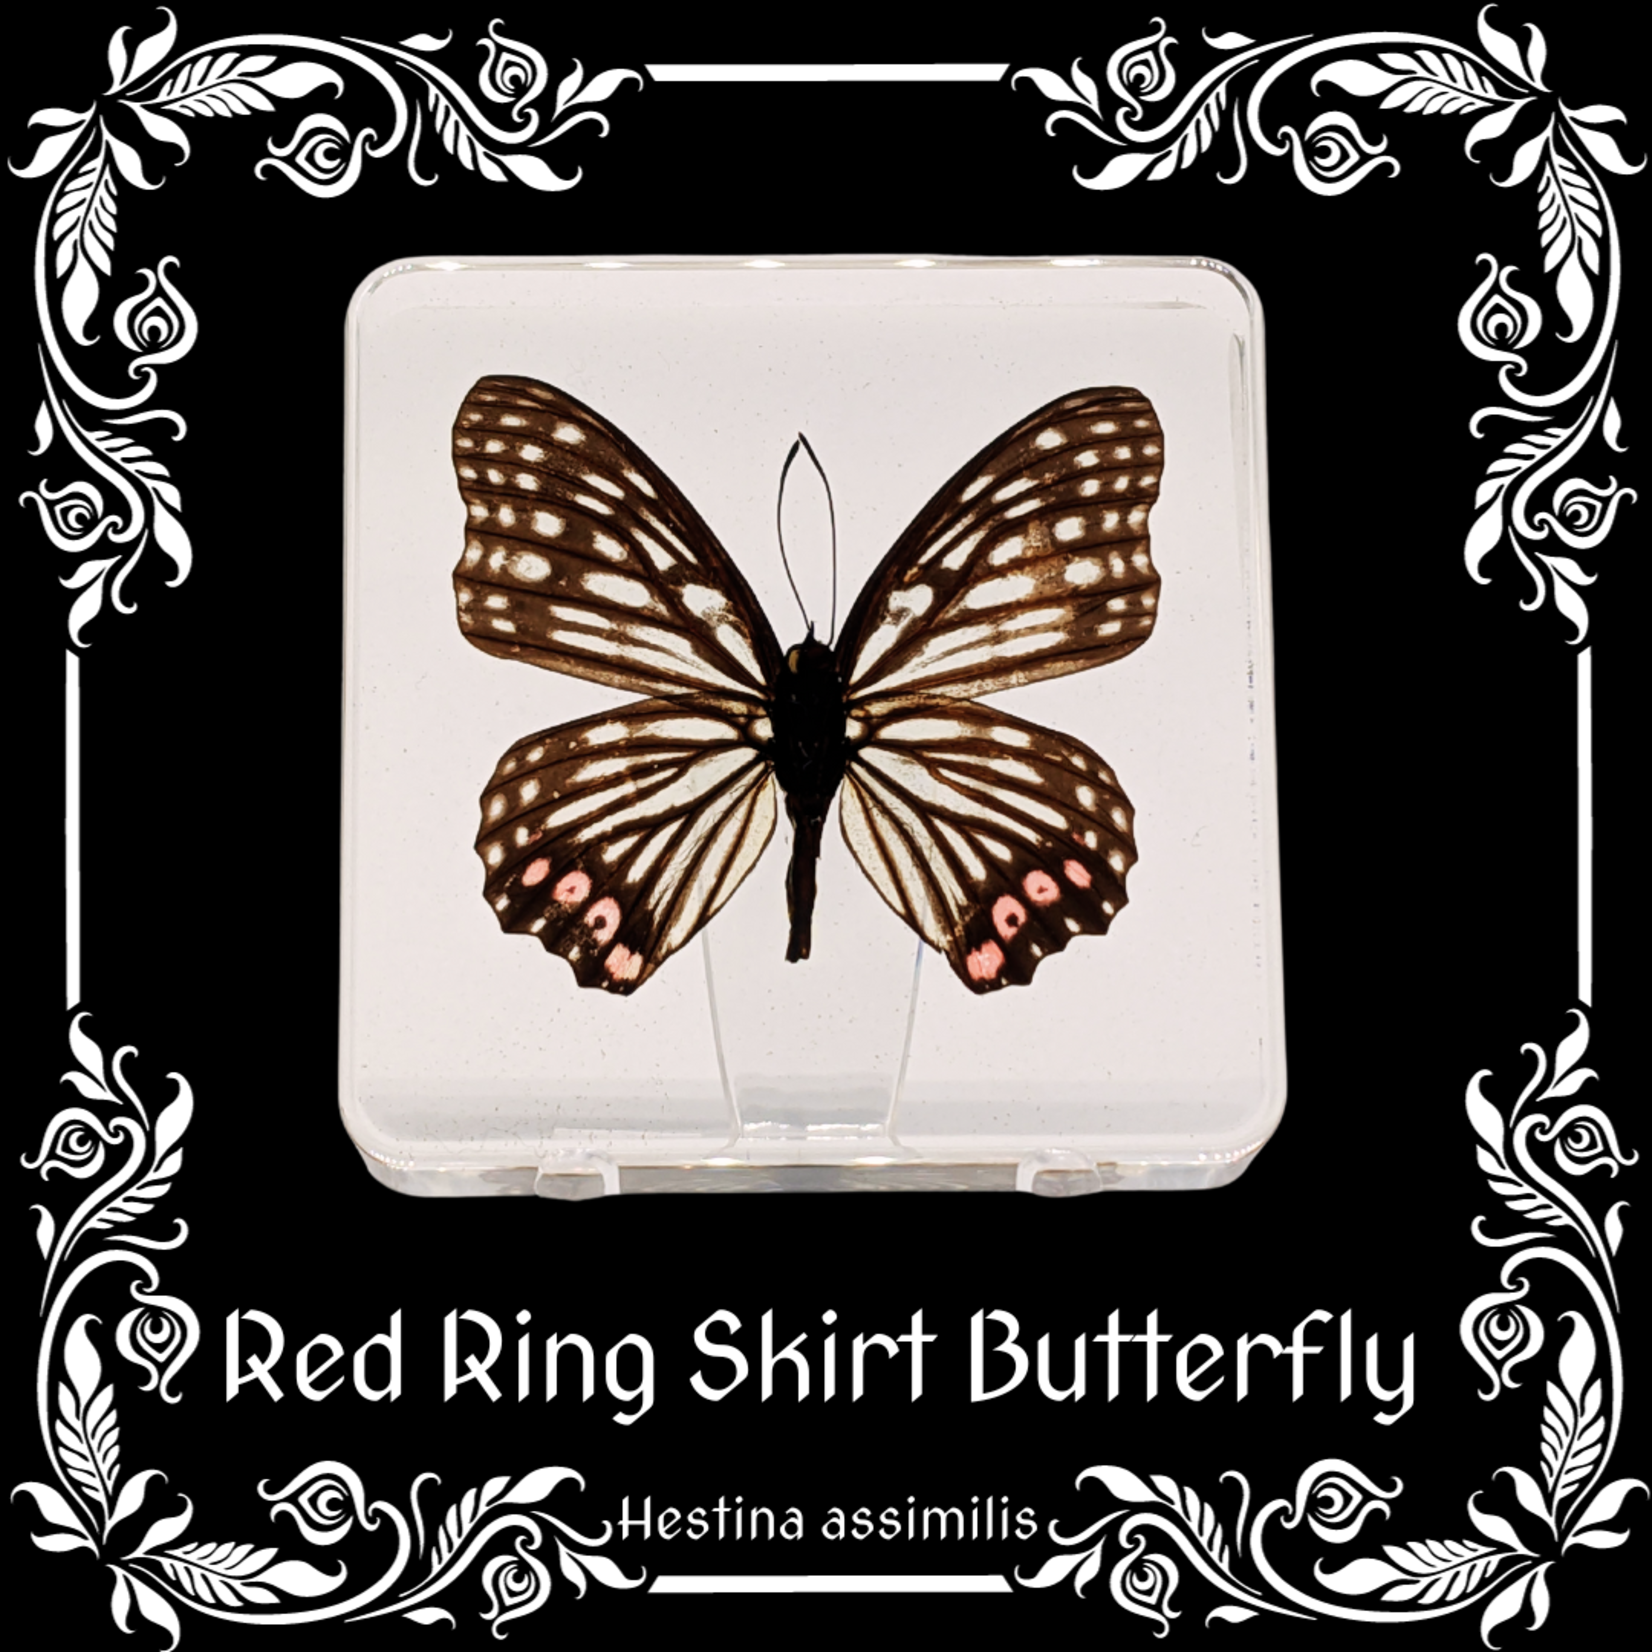 Insects In Resin Red Ring Skirt Butterfly in Resin (Hestina Assimilis) with Display Stand